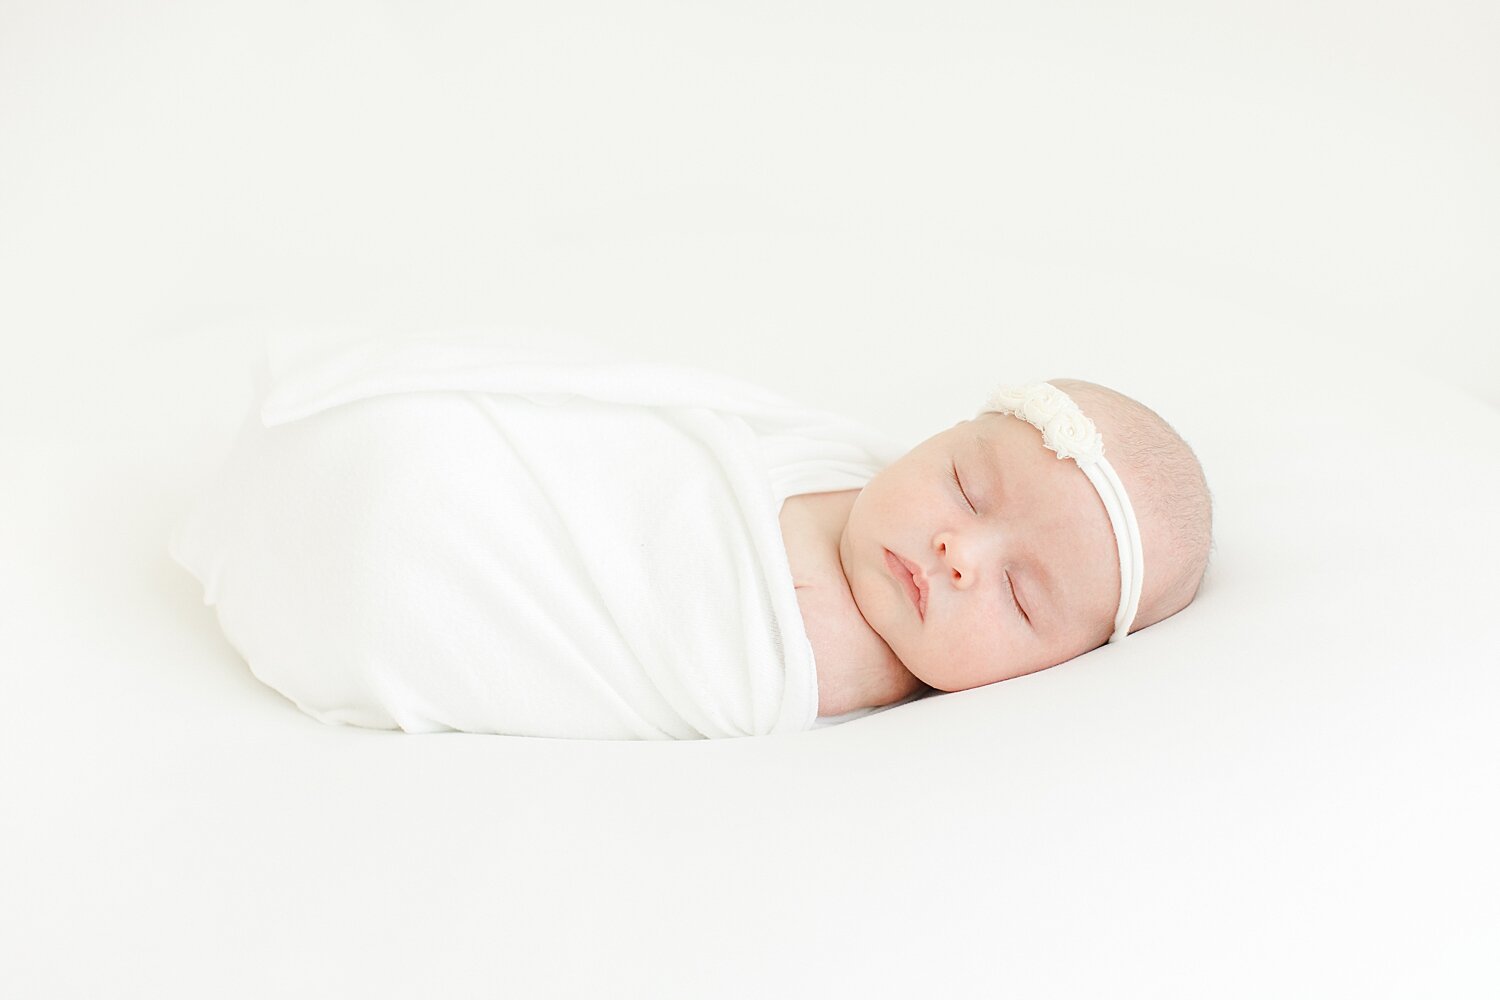 Baby Girl's Newborn Session in Studio in Fairfield County, CT | Kristin Wood Photography